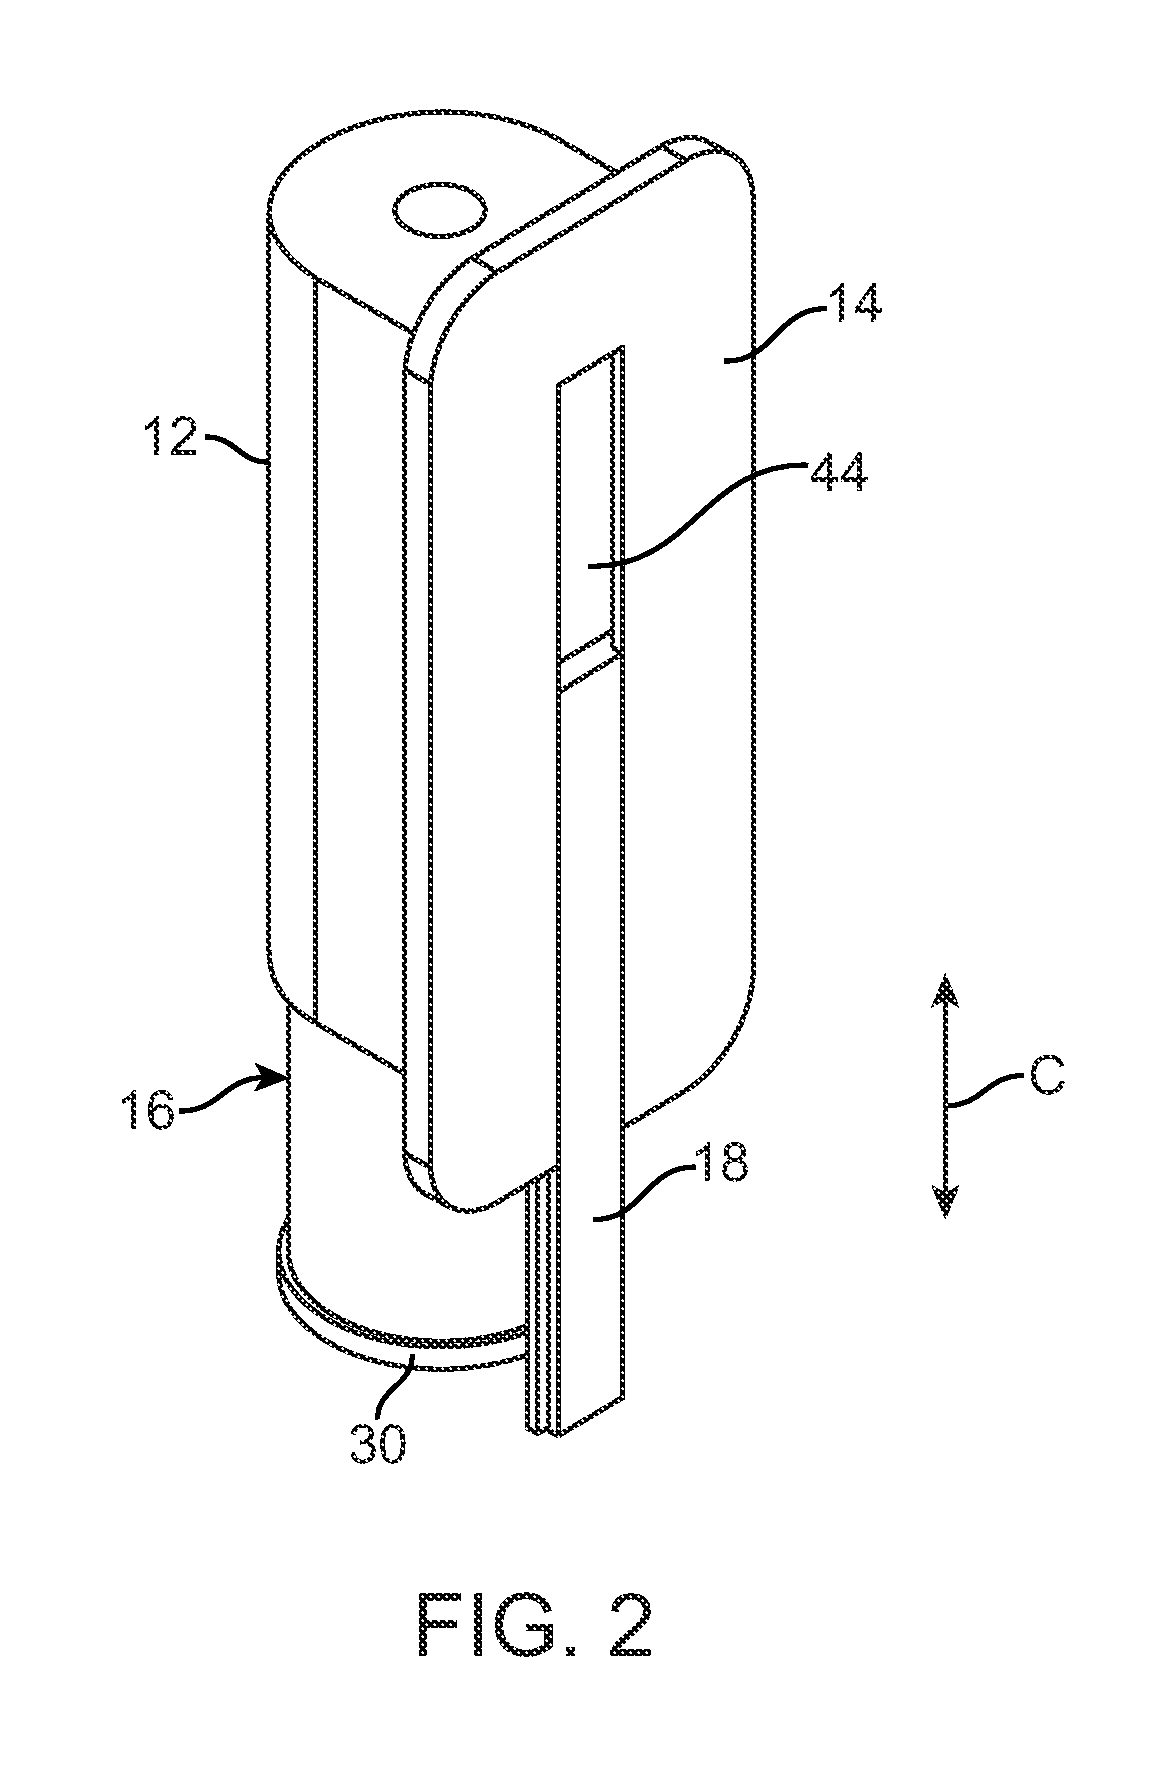 Interspinous process device and method